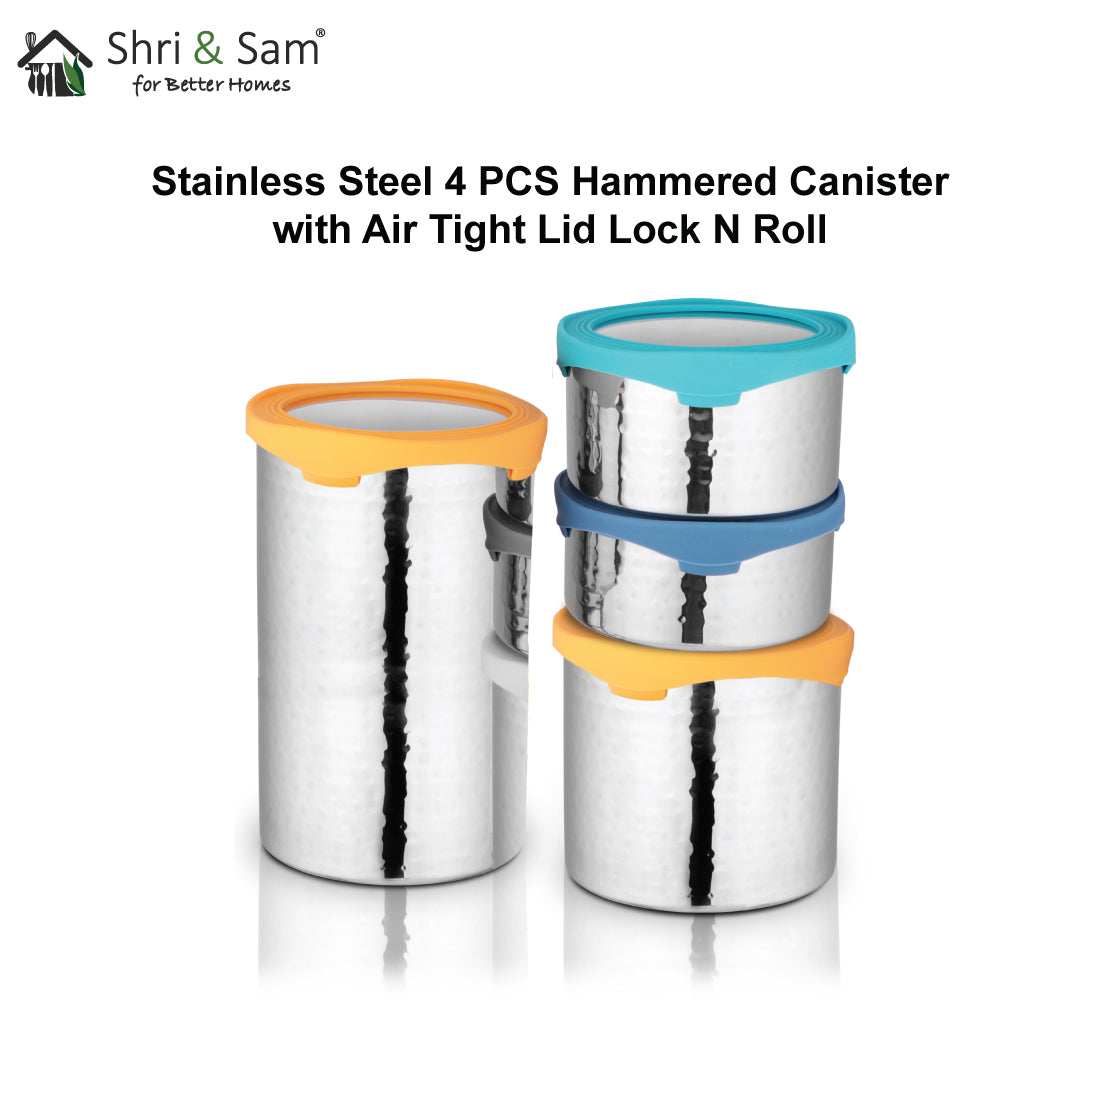 Stainless Steel 4 PCS Hammered Canister with Air Tight Lid Lock N Roll